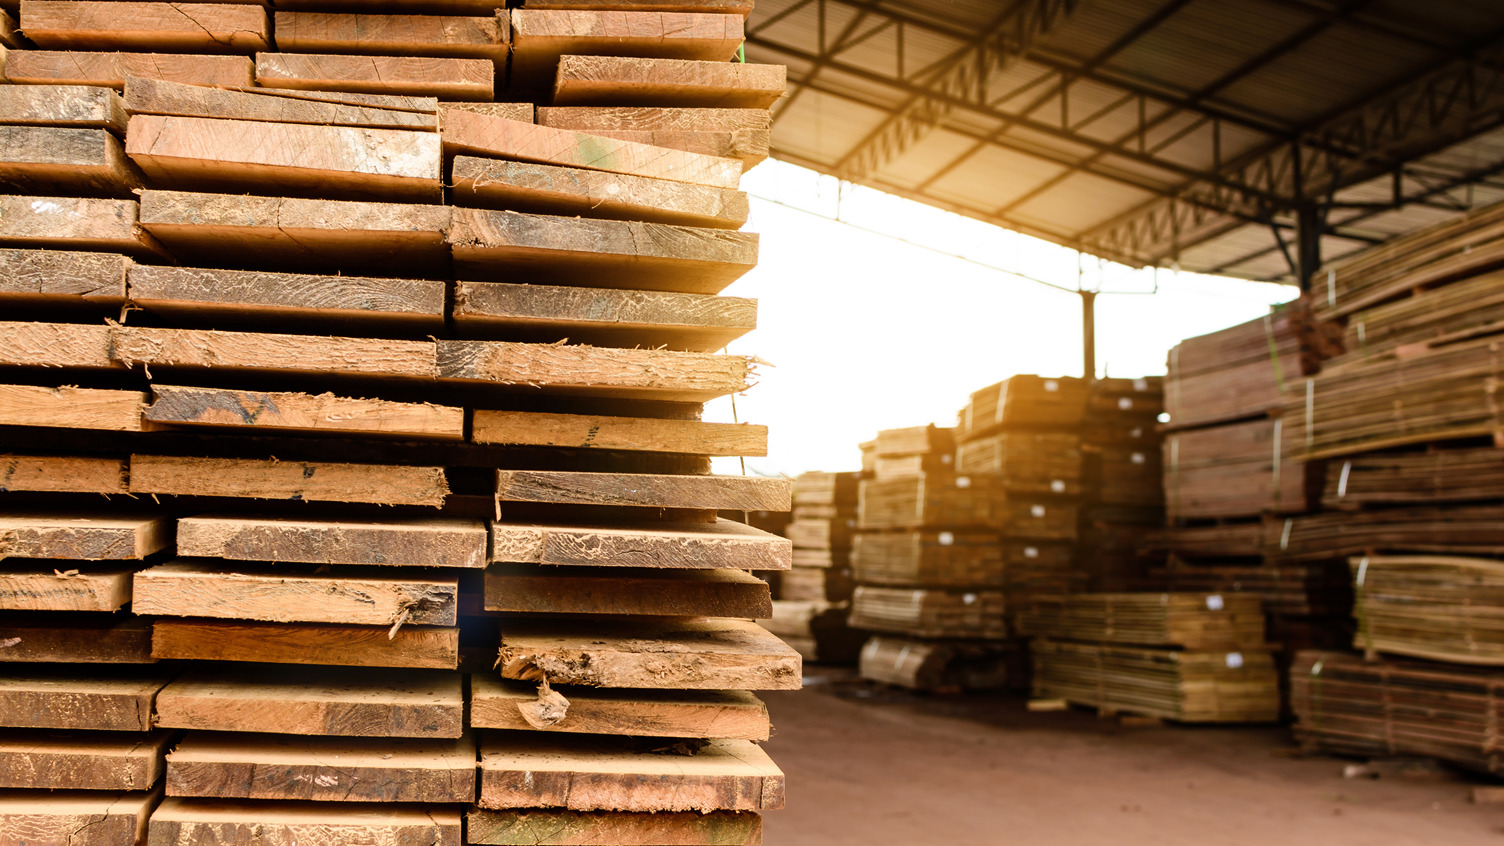 Wood drying outside at a lumber mill